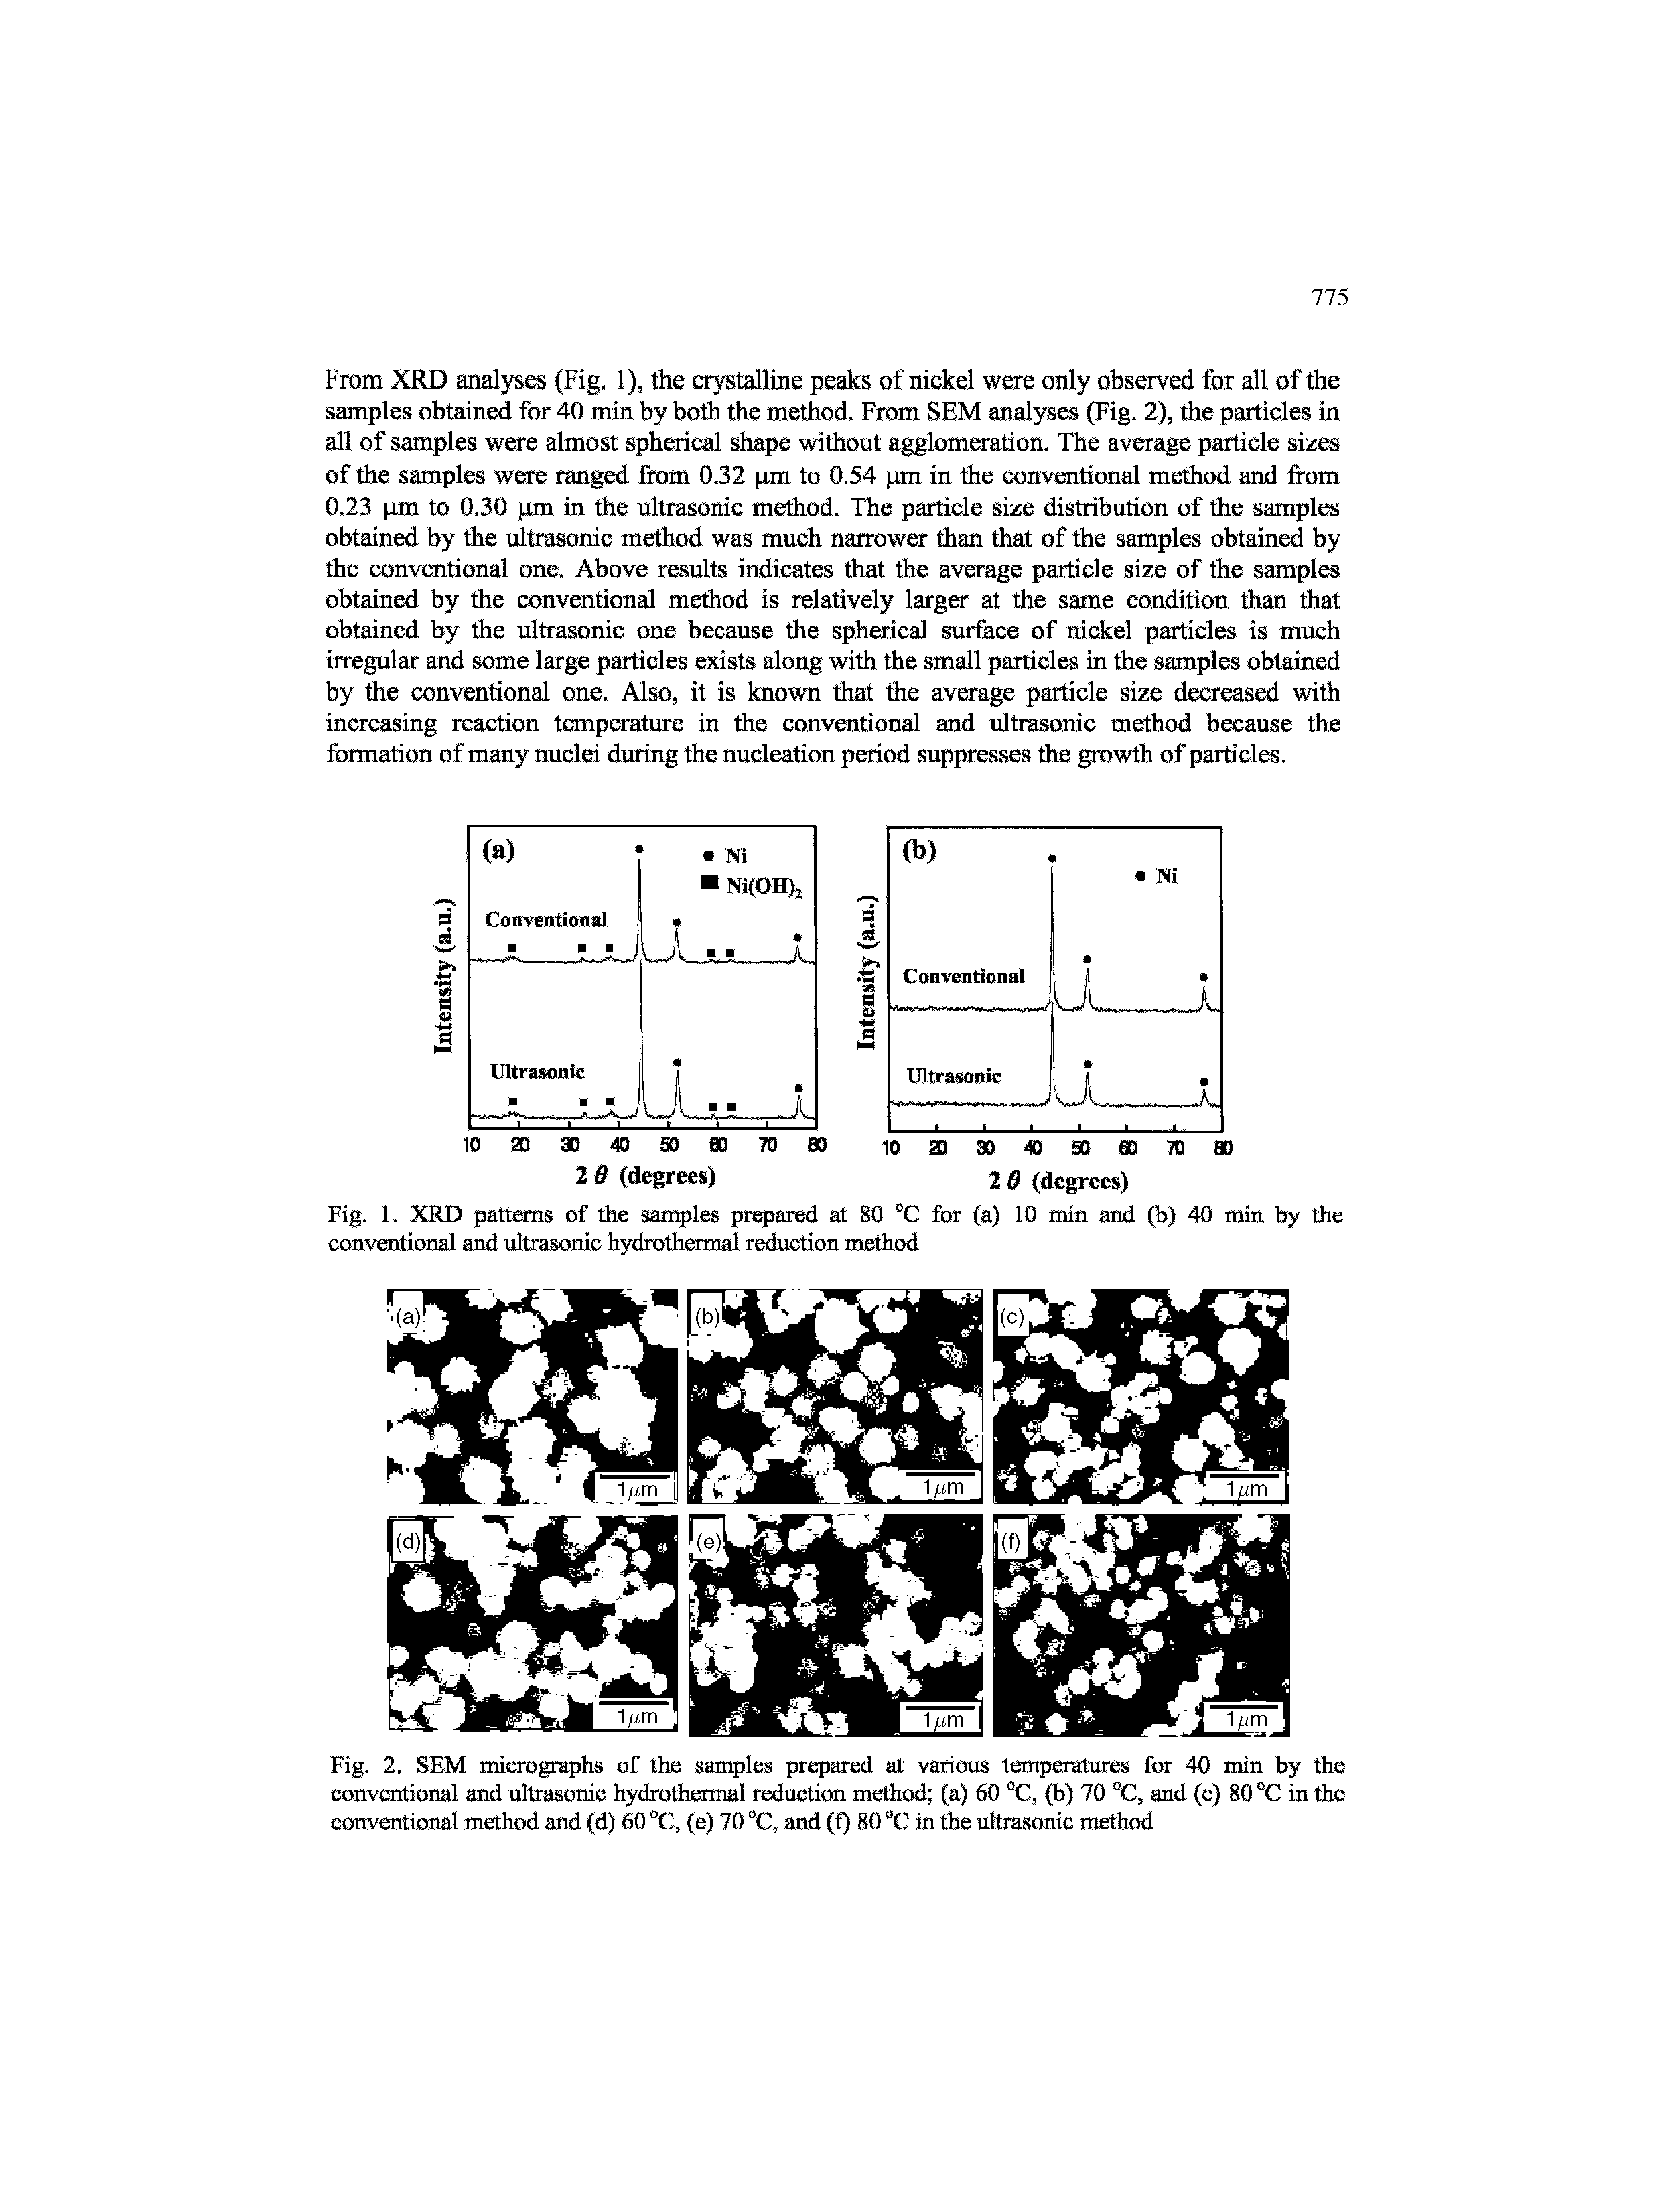 Fig. 1. XRD patterns of the sample prepared at 80 °C for (a) 10 min and (b) 40 min by the conventional and ultrasonic hydrothermal reduction method...